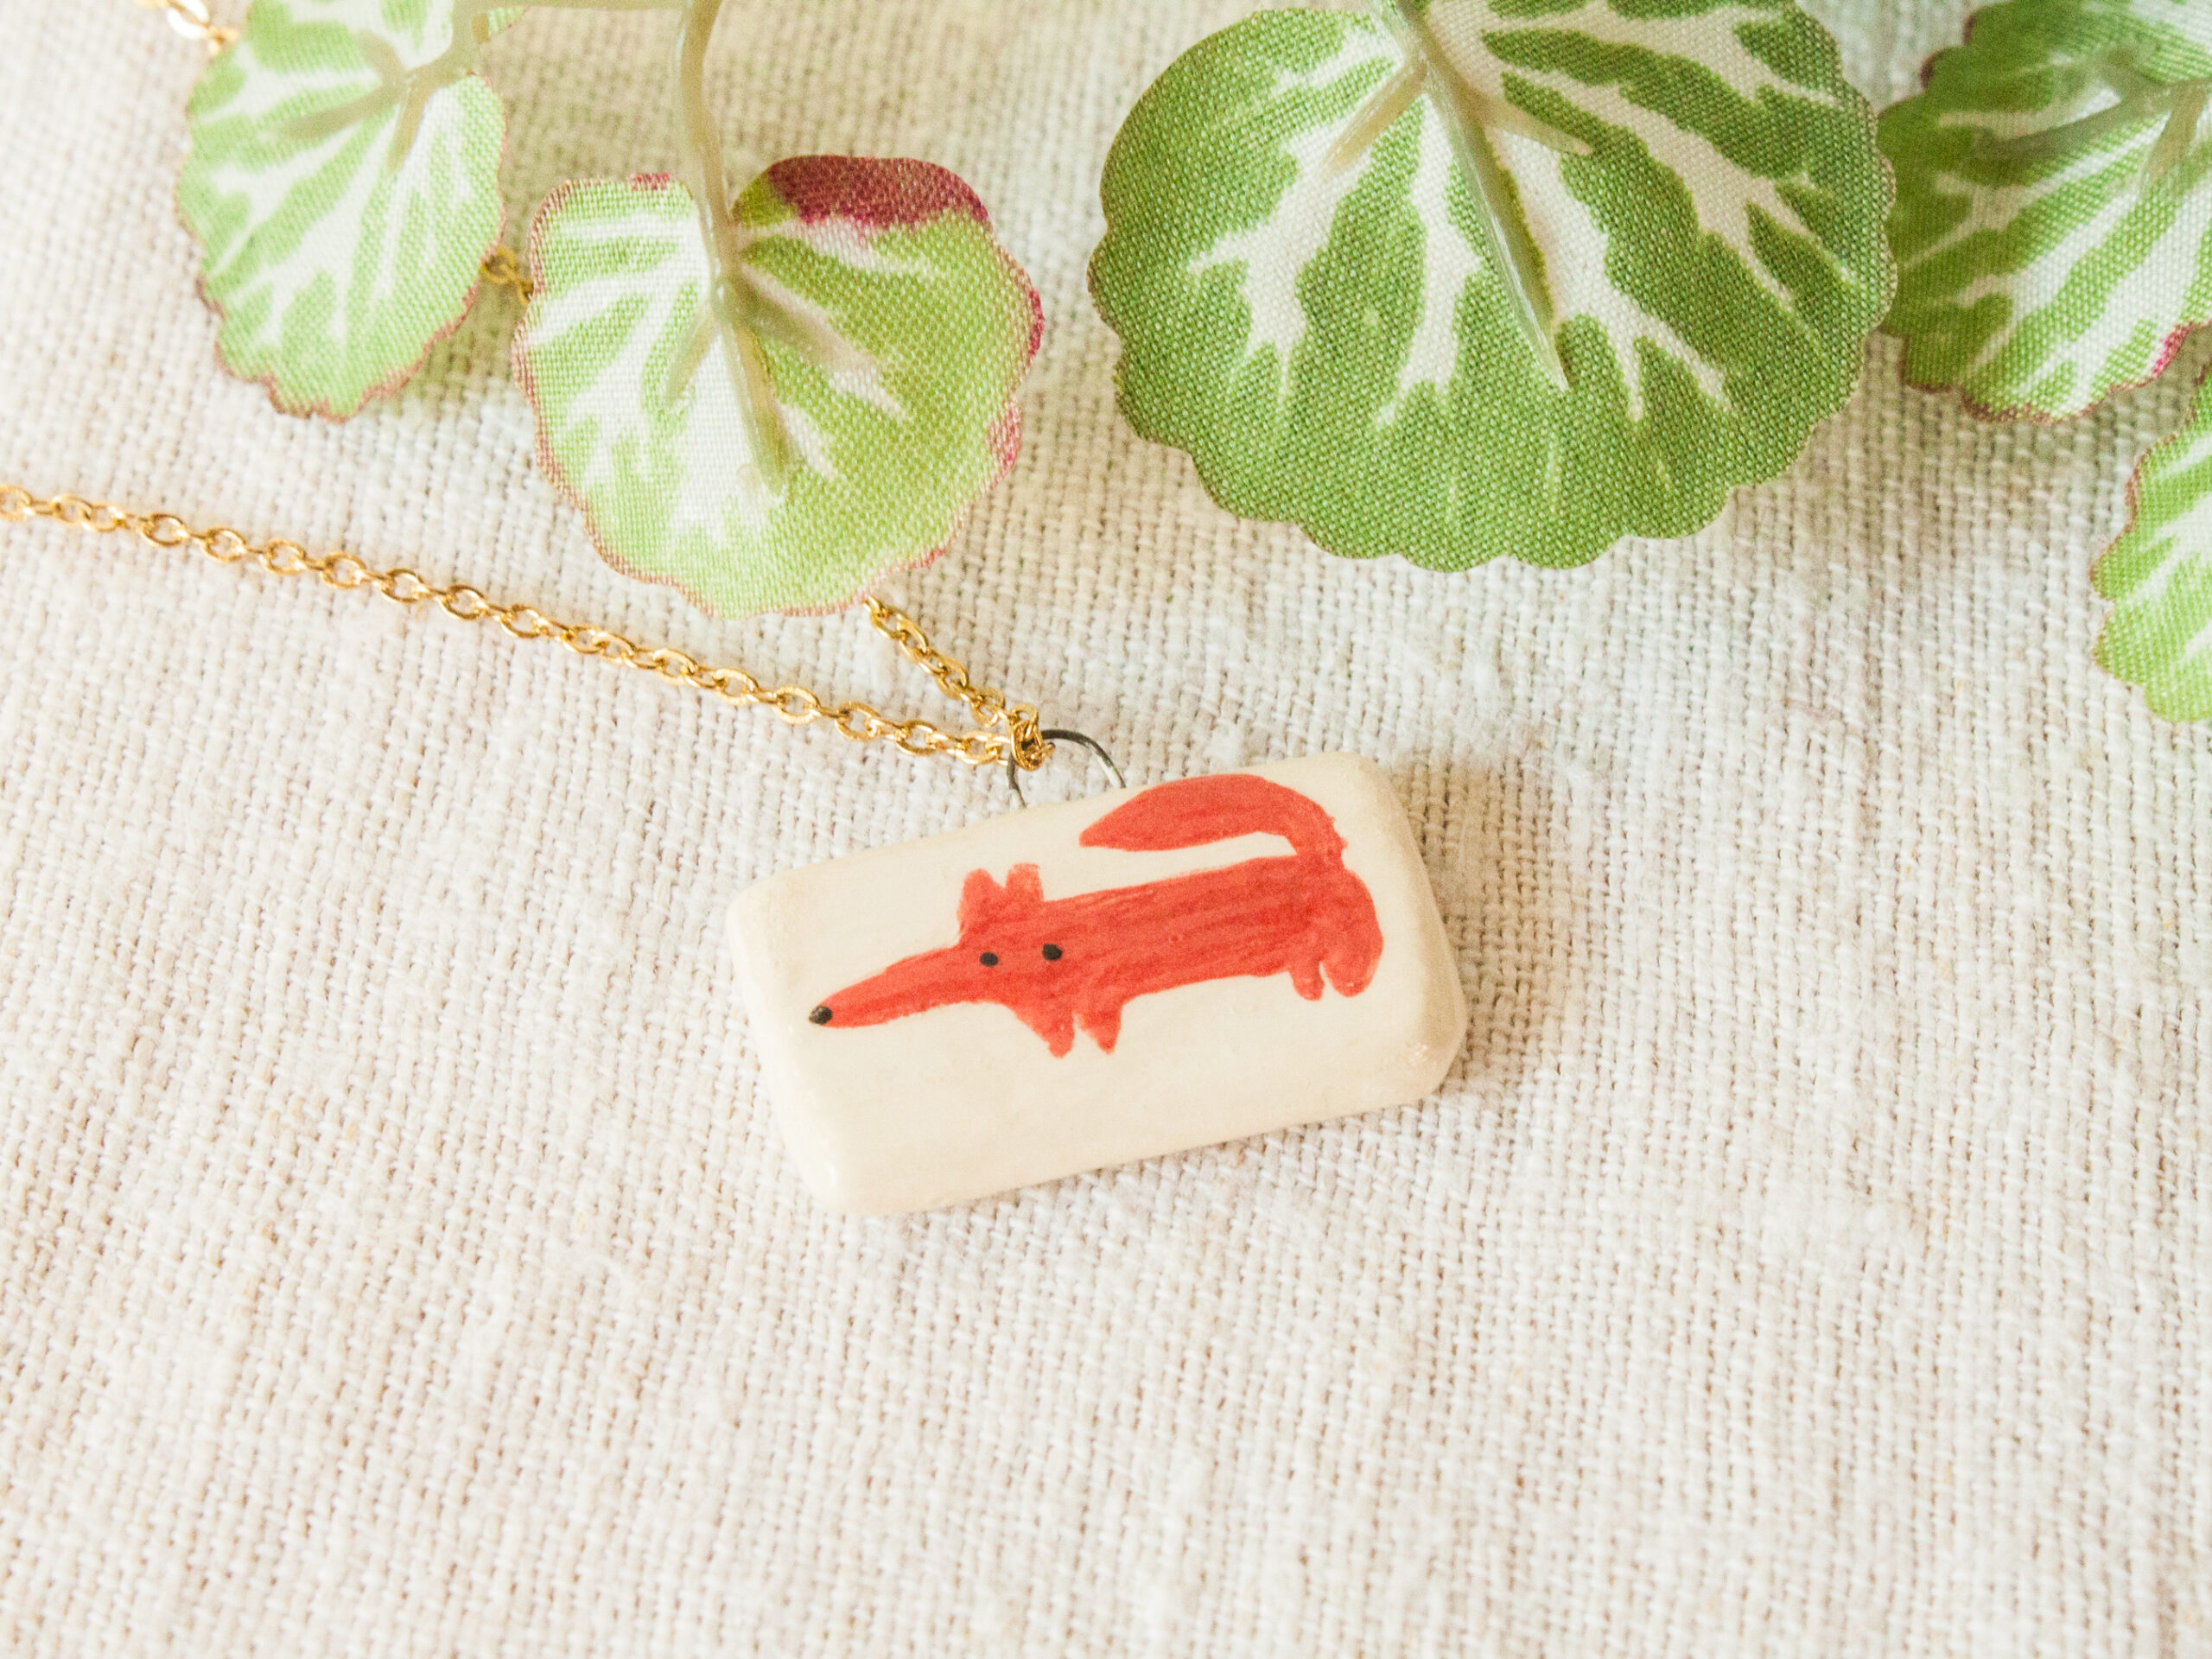 Minute fox necklace I made